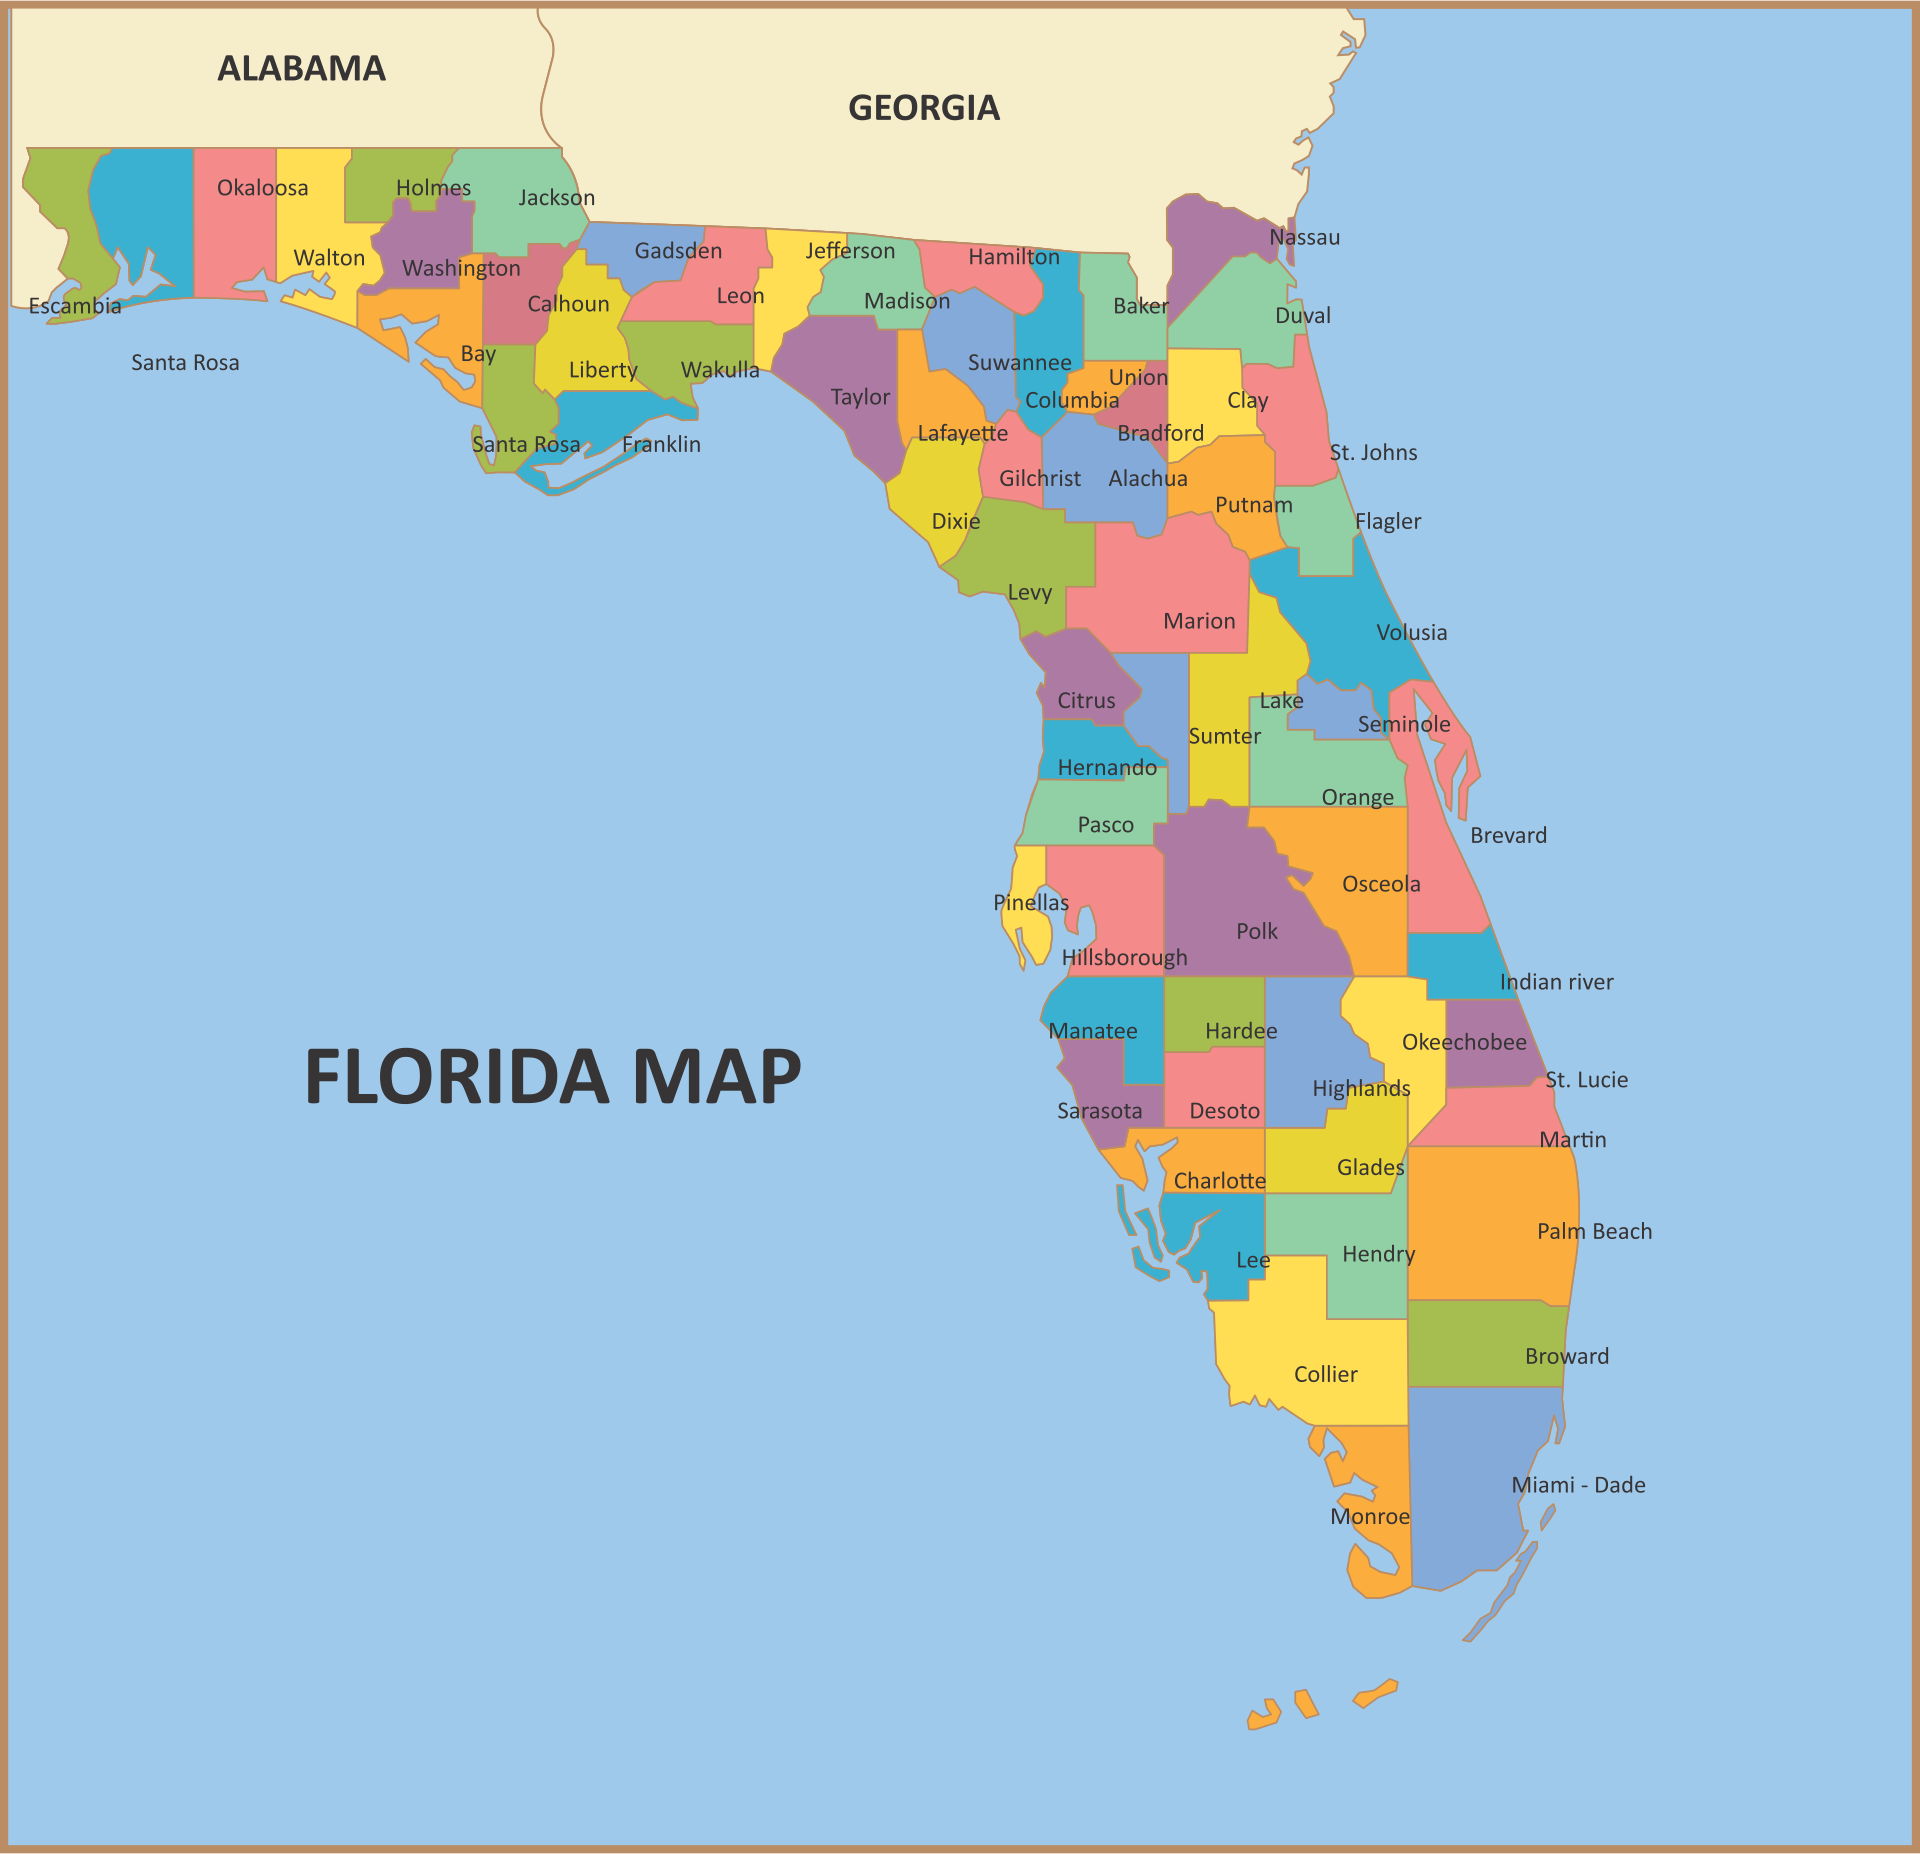 6 Best Images of Florida State Map Printable - Printable Florida Map